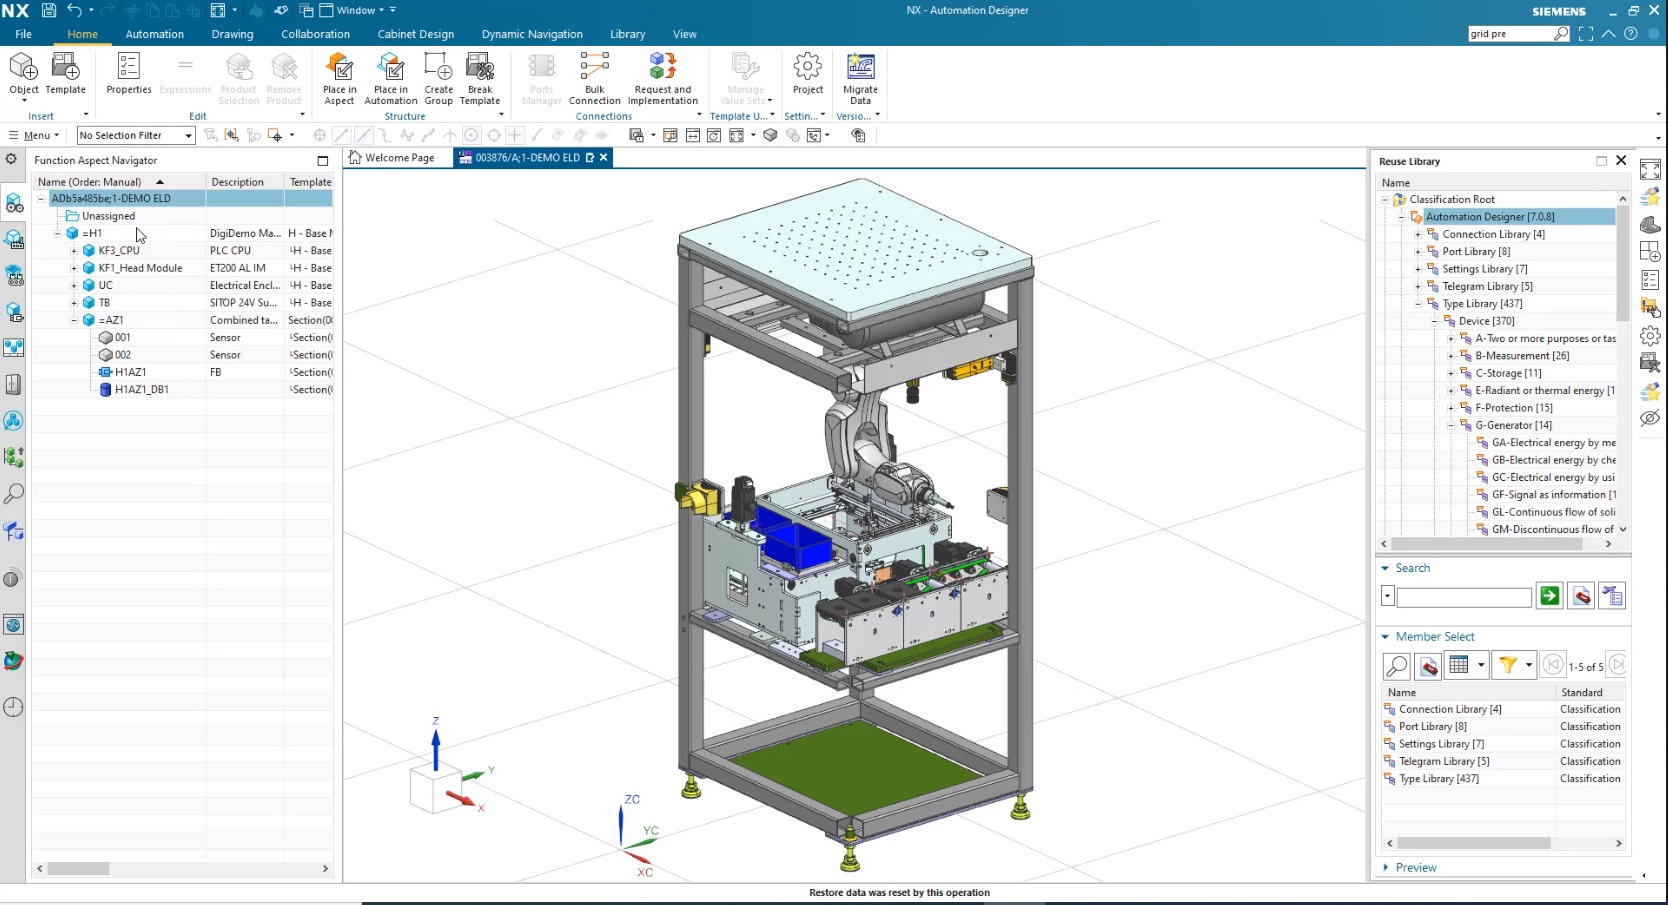 Screen shot showing the functional, modular design of automation systems with Automation Designer